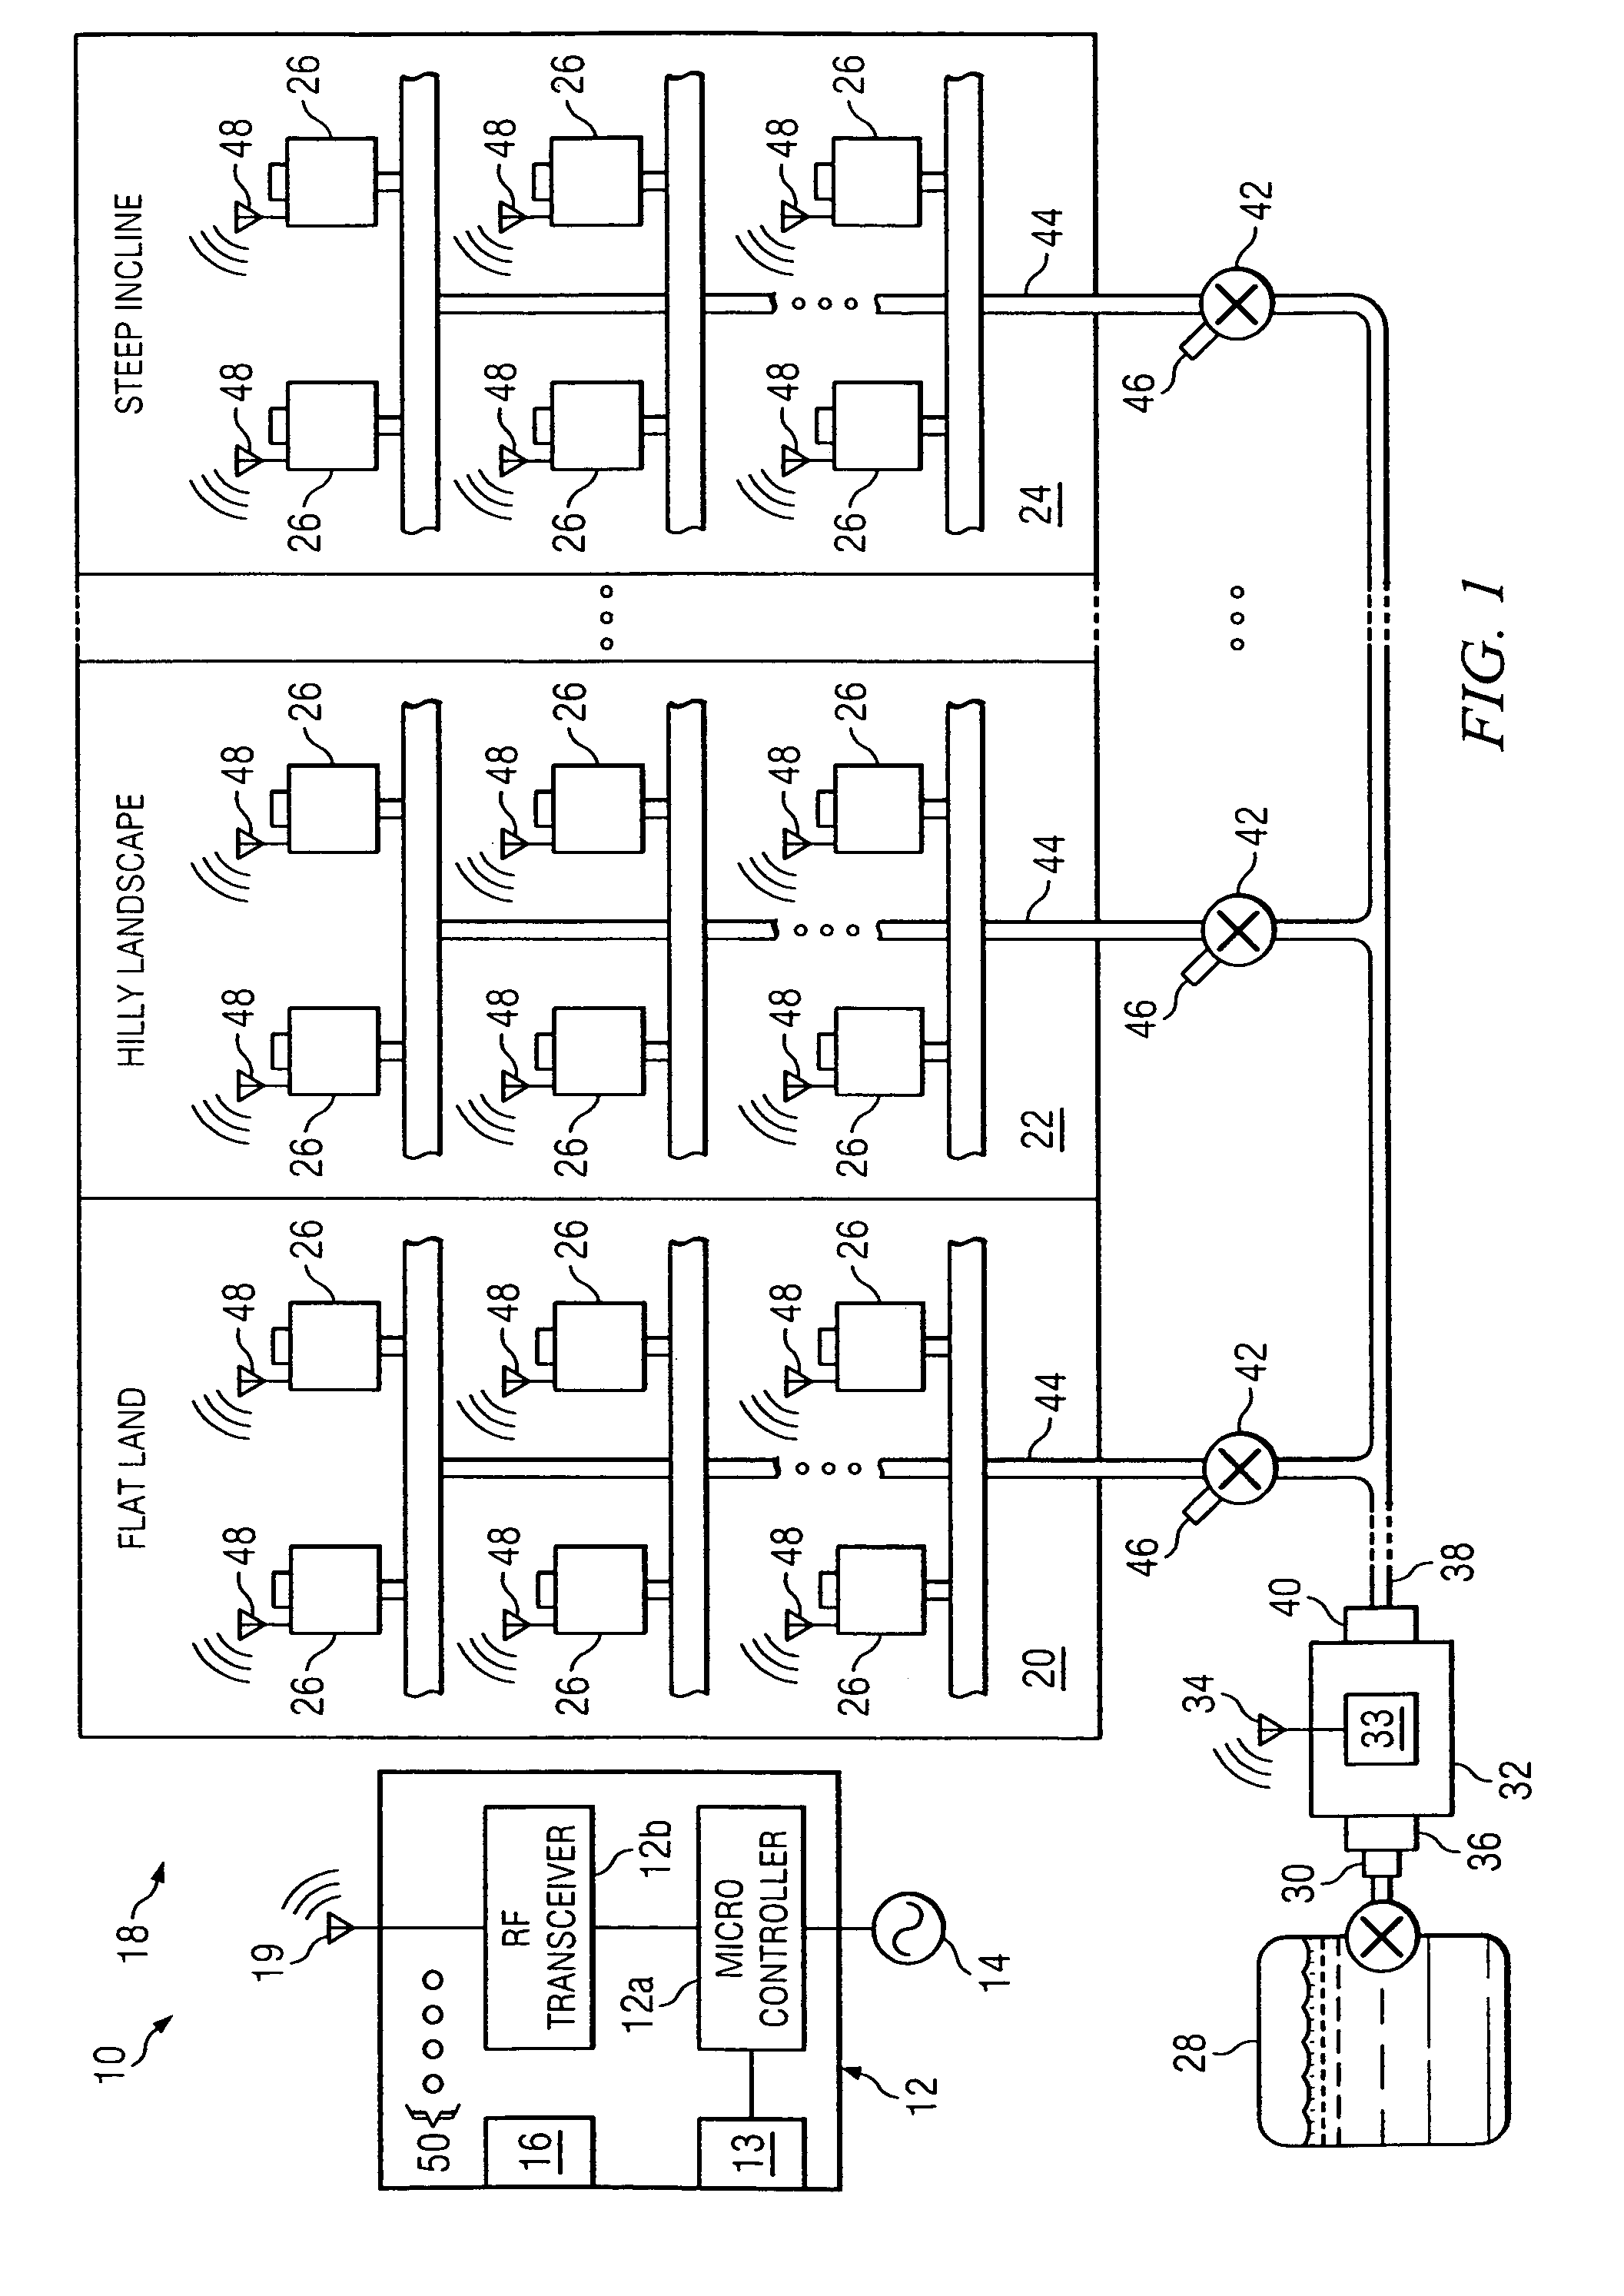 Methods, systems and apparatuses for automated irrigation and chemical treatment